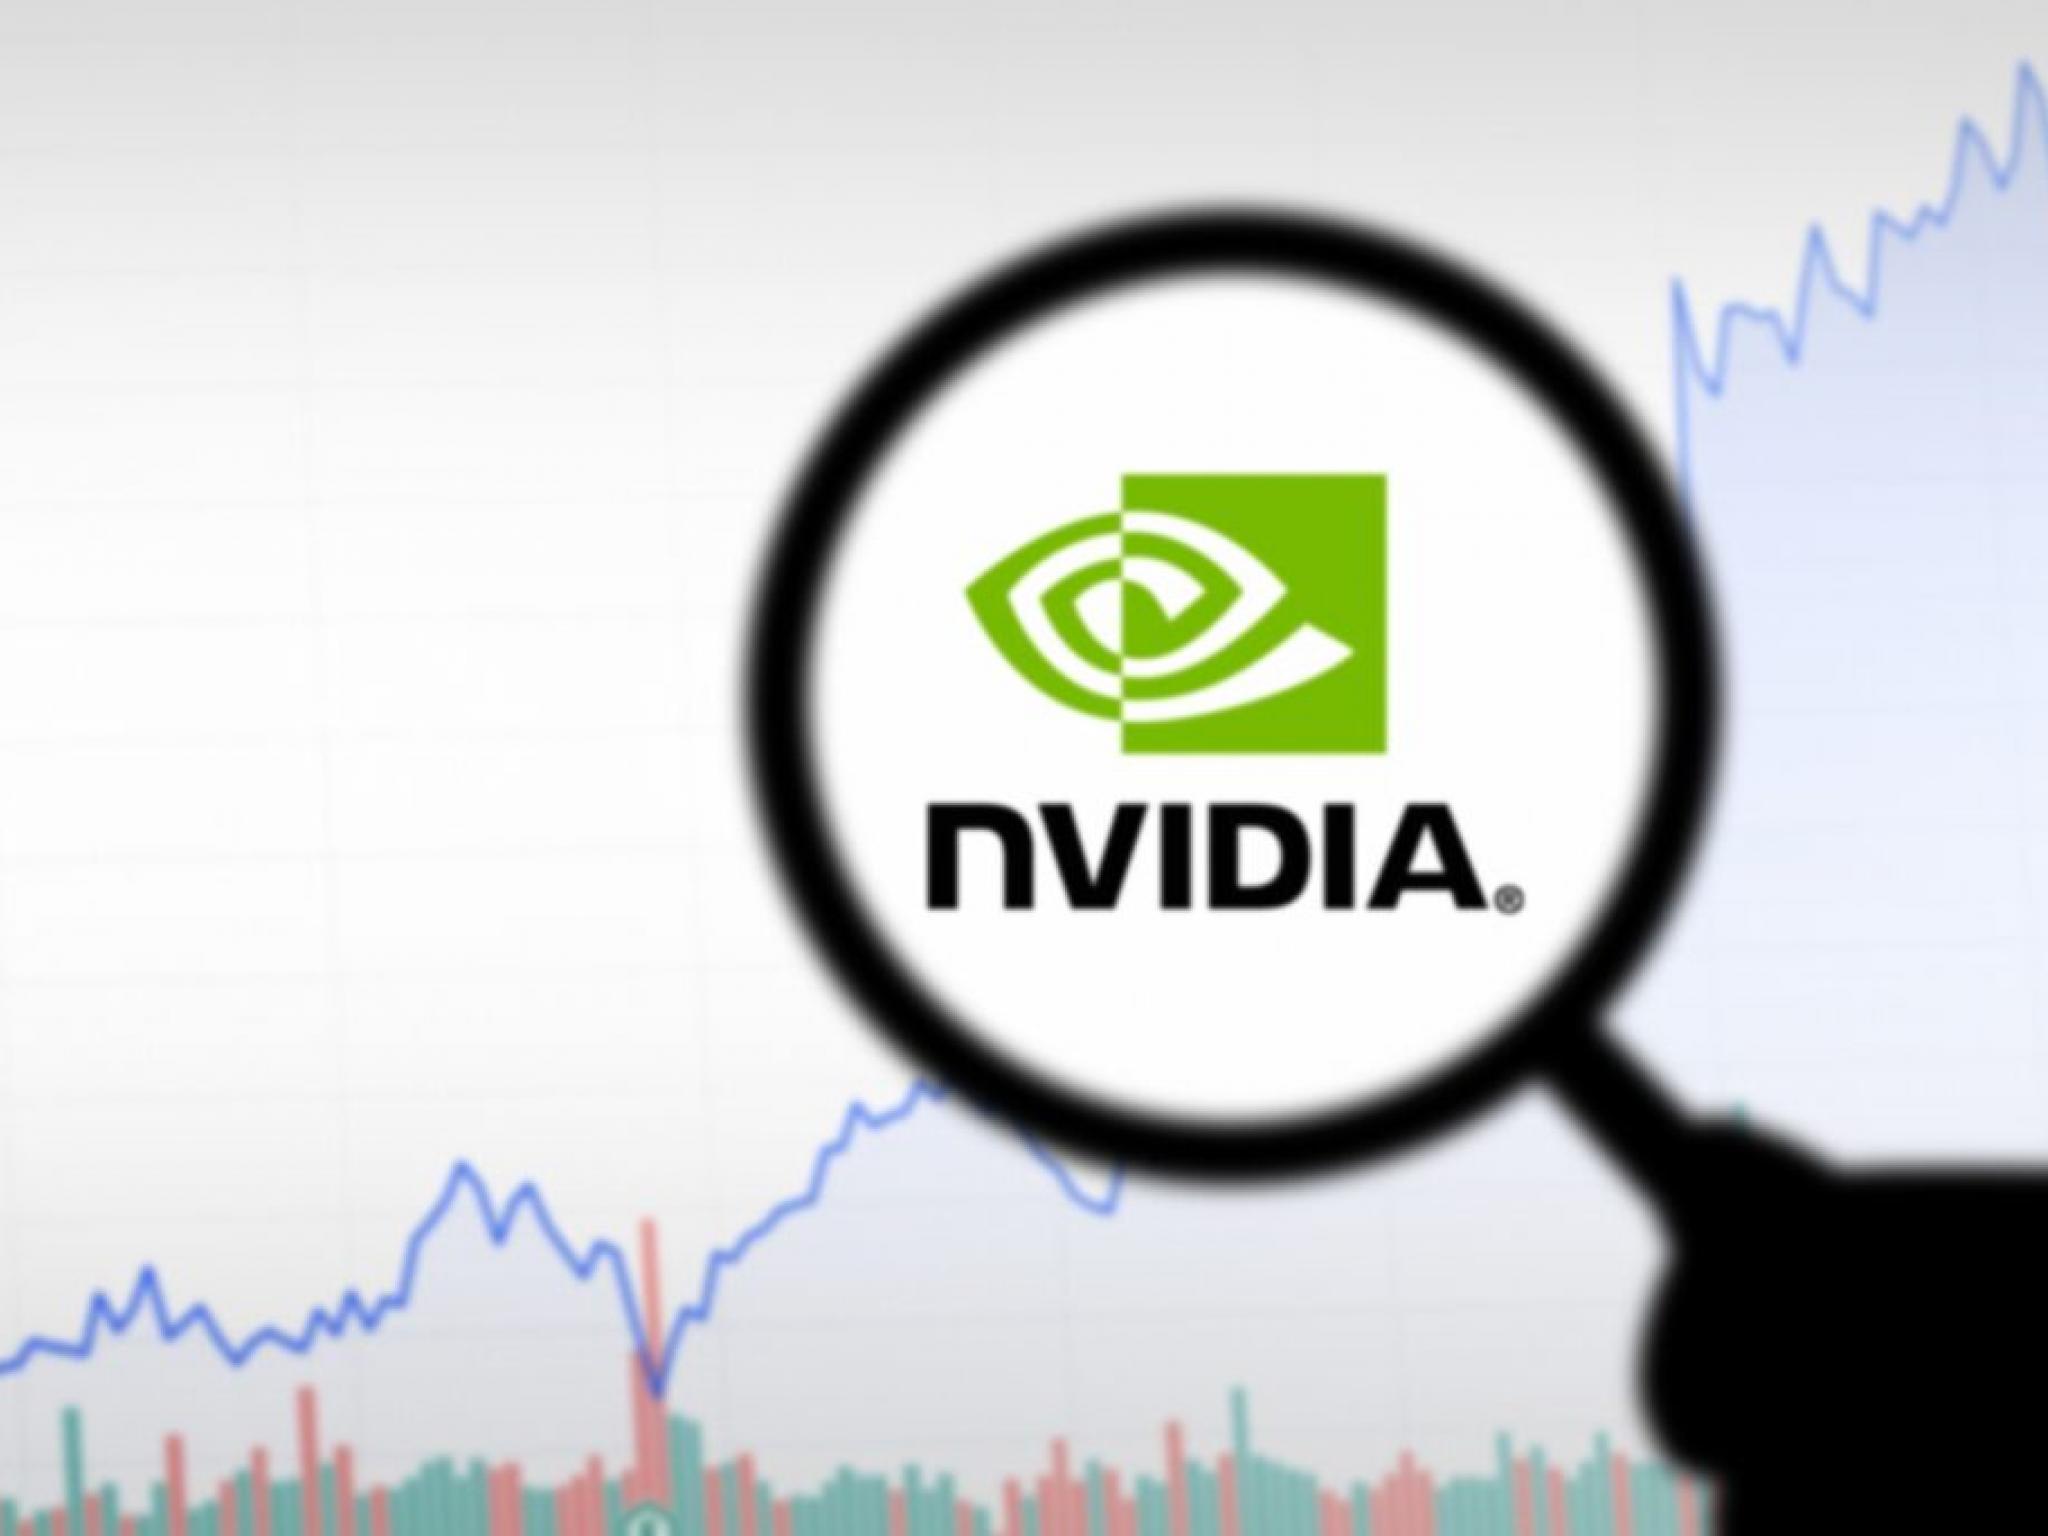  nvidias-sovereign-ai-thrust-accelerates-sales-growth-amid-global-government-ai-investments 